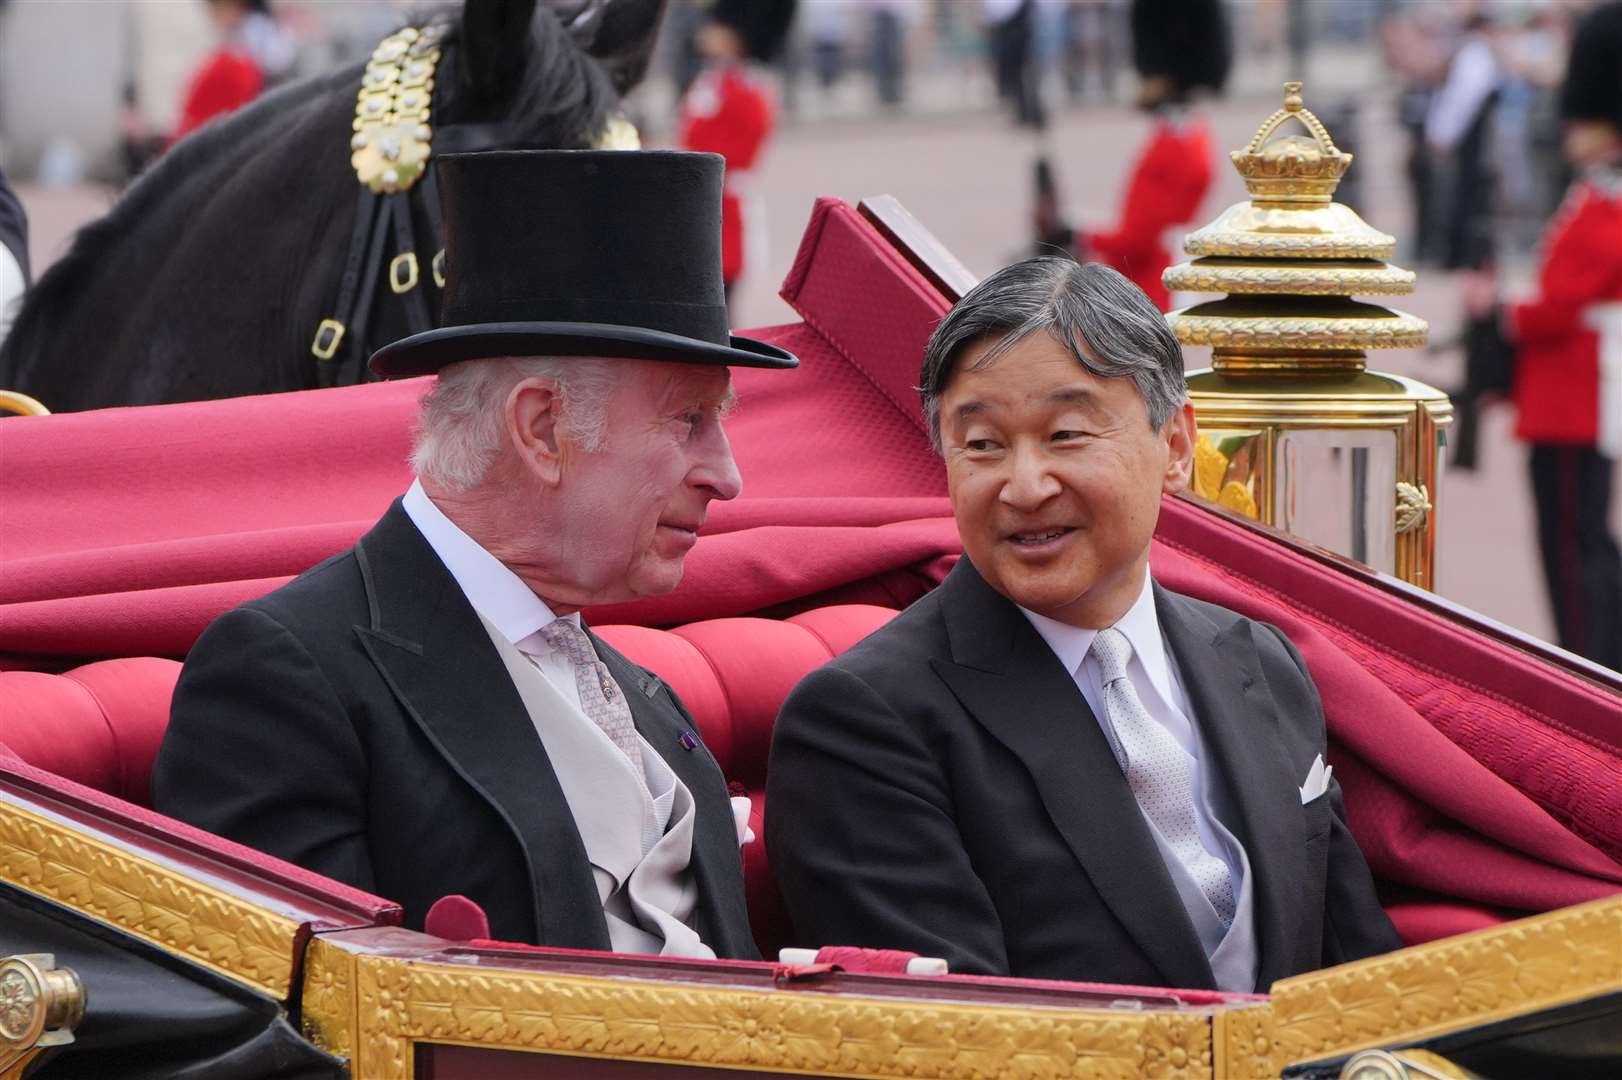 The King and Emperor Naruhito of Japan travel together in the lead coach (Jonathan Brady/PA)